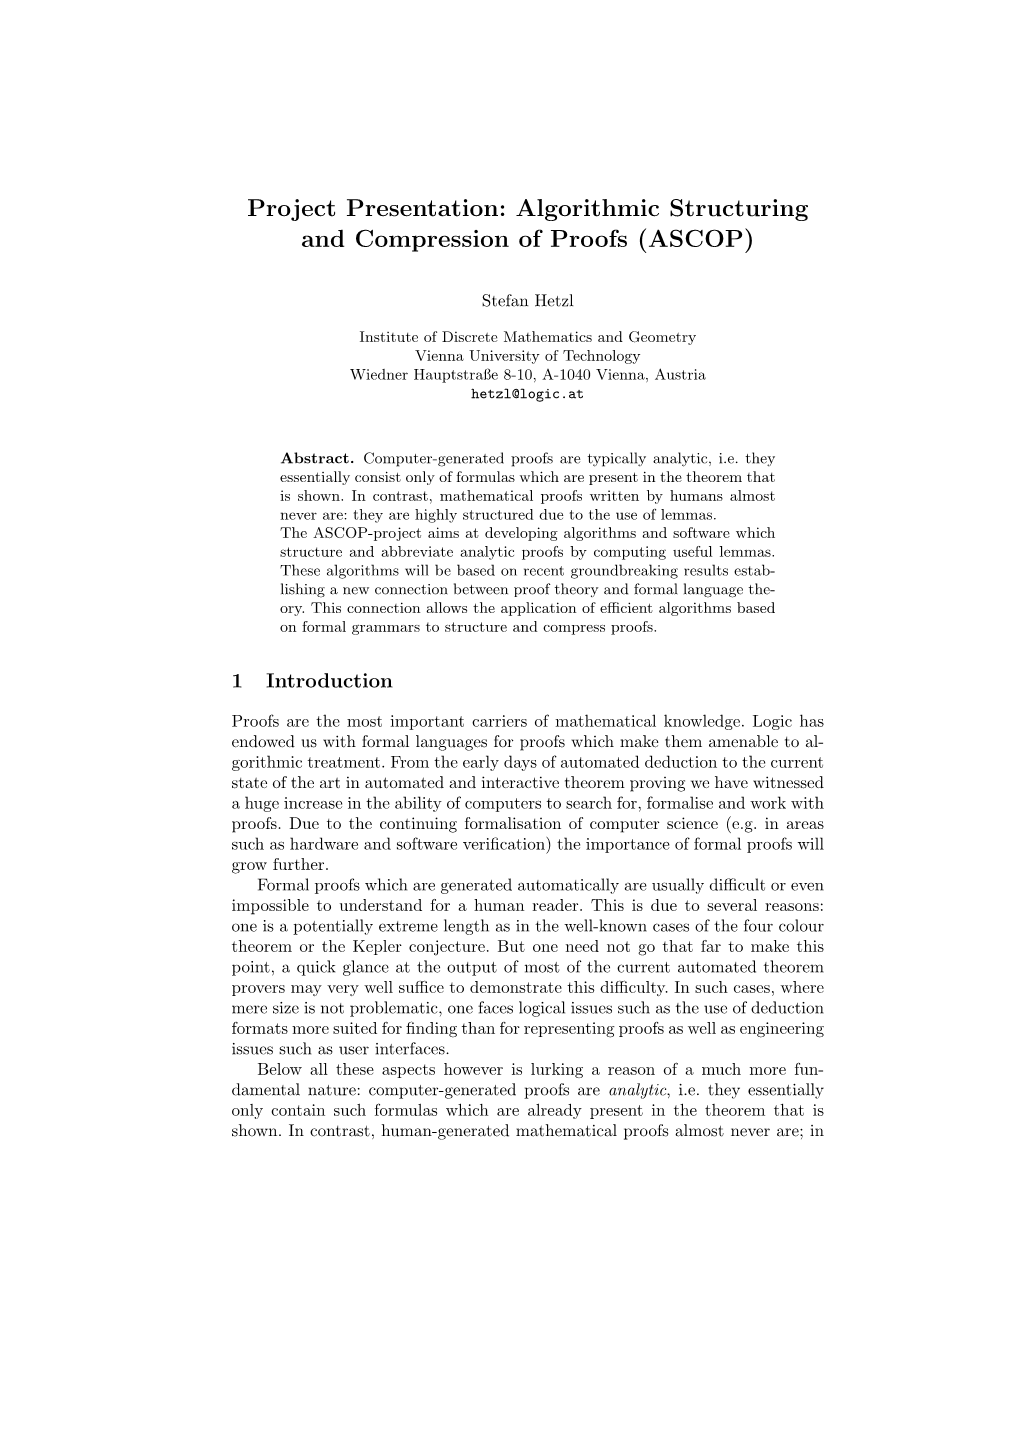 Algorithmic Structuring and Compression of Proofs (ASCOP)